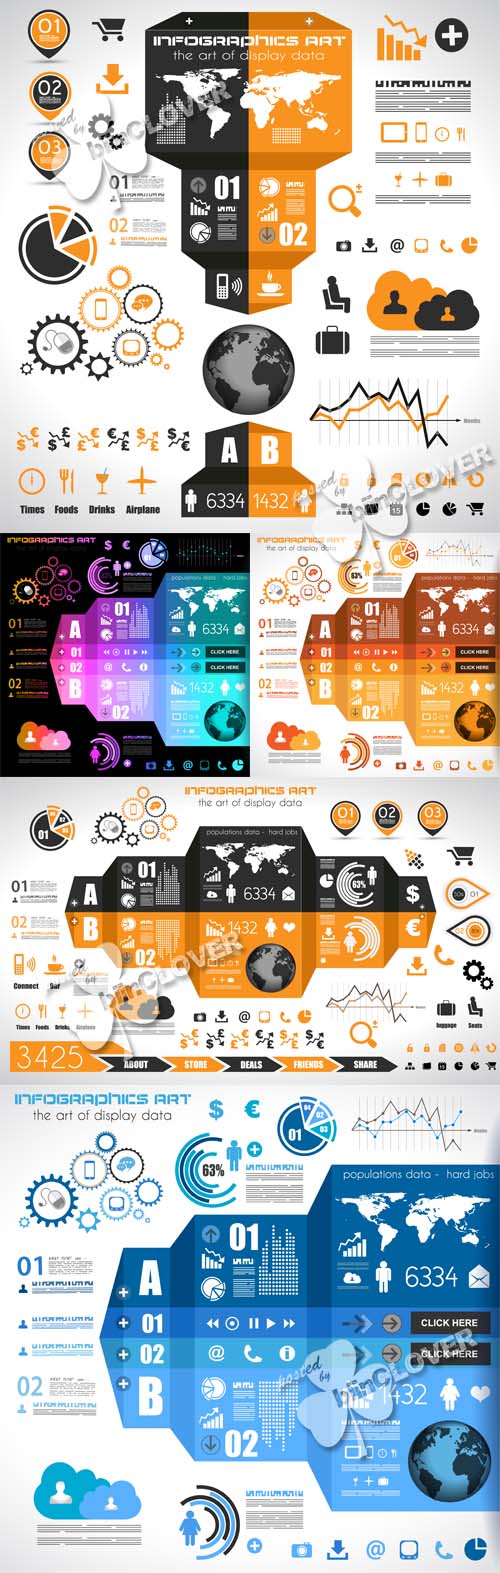 Infographic design elements and tags 0444